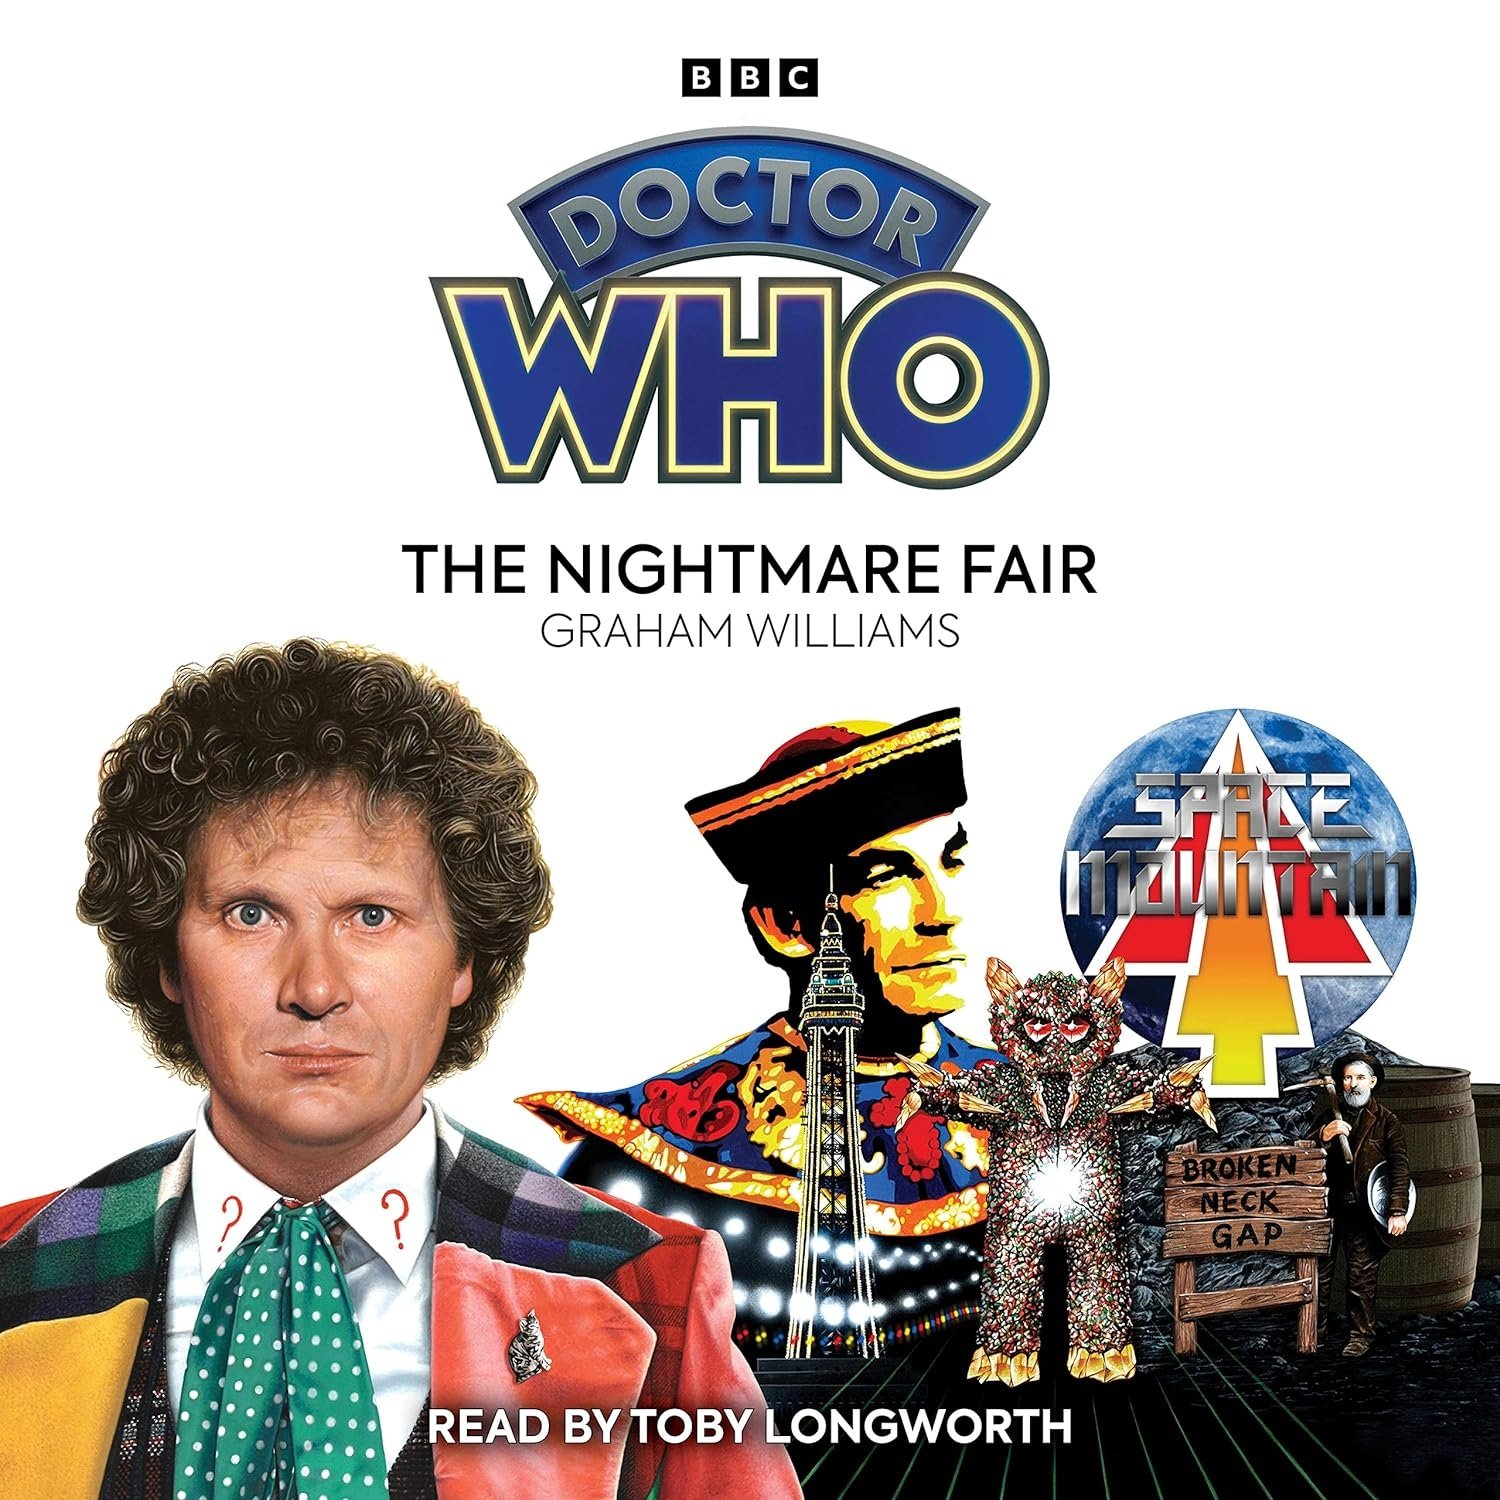 Reviewed: The Nightmare Fair, a Sixth Doctor Audiobook Starring the Celestial Toymaker